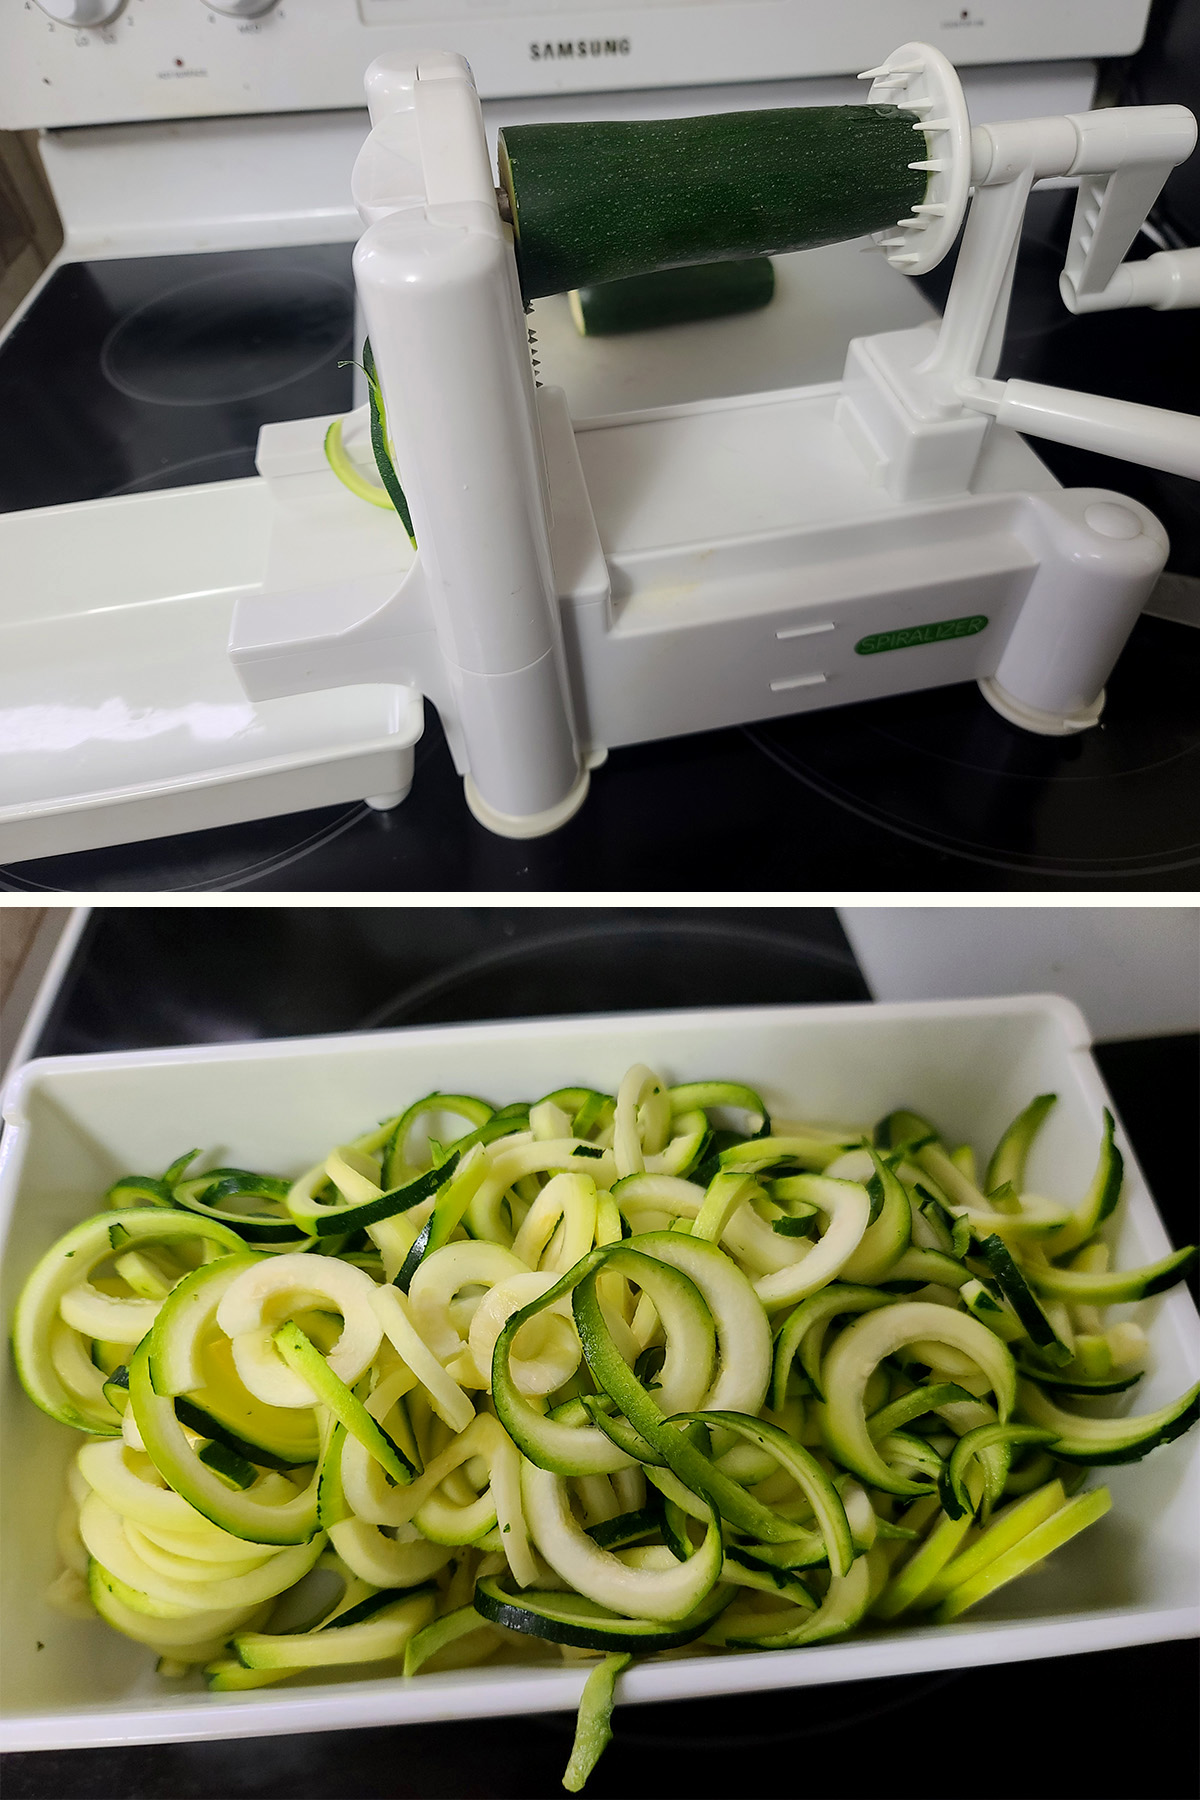 A white spiralizer machine, and a container of spiralized zucchini noodles.